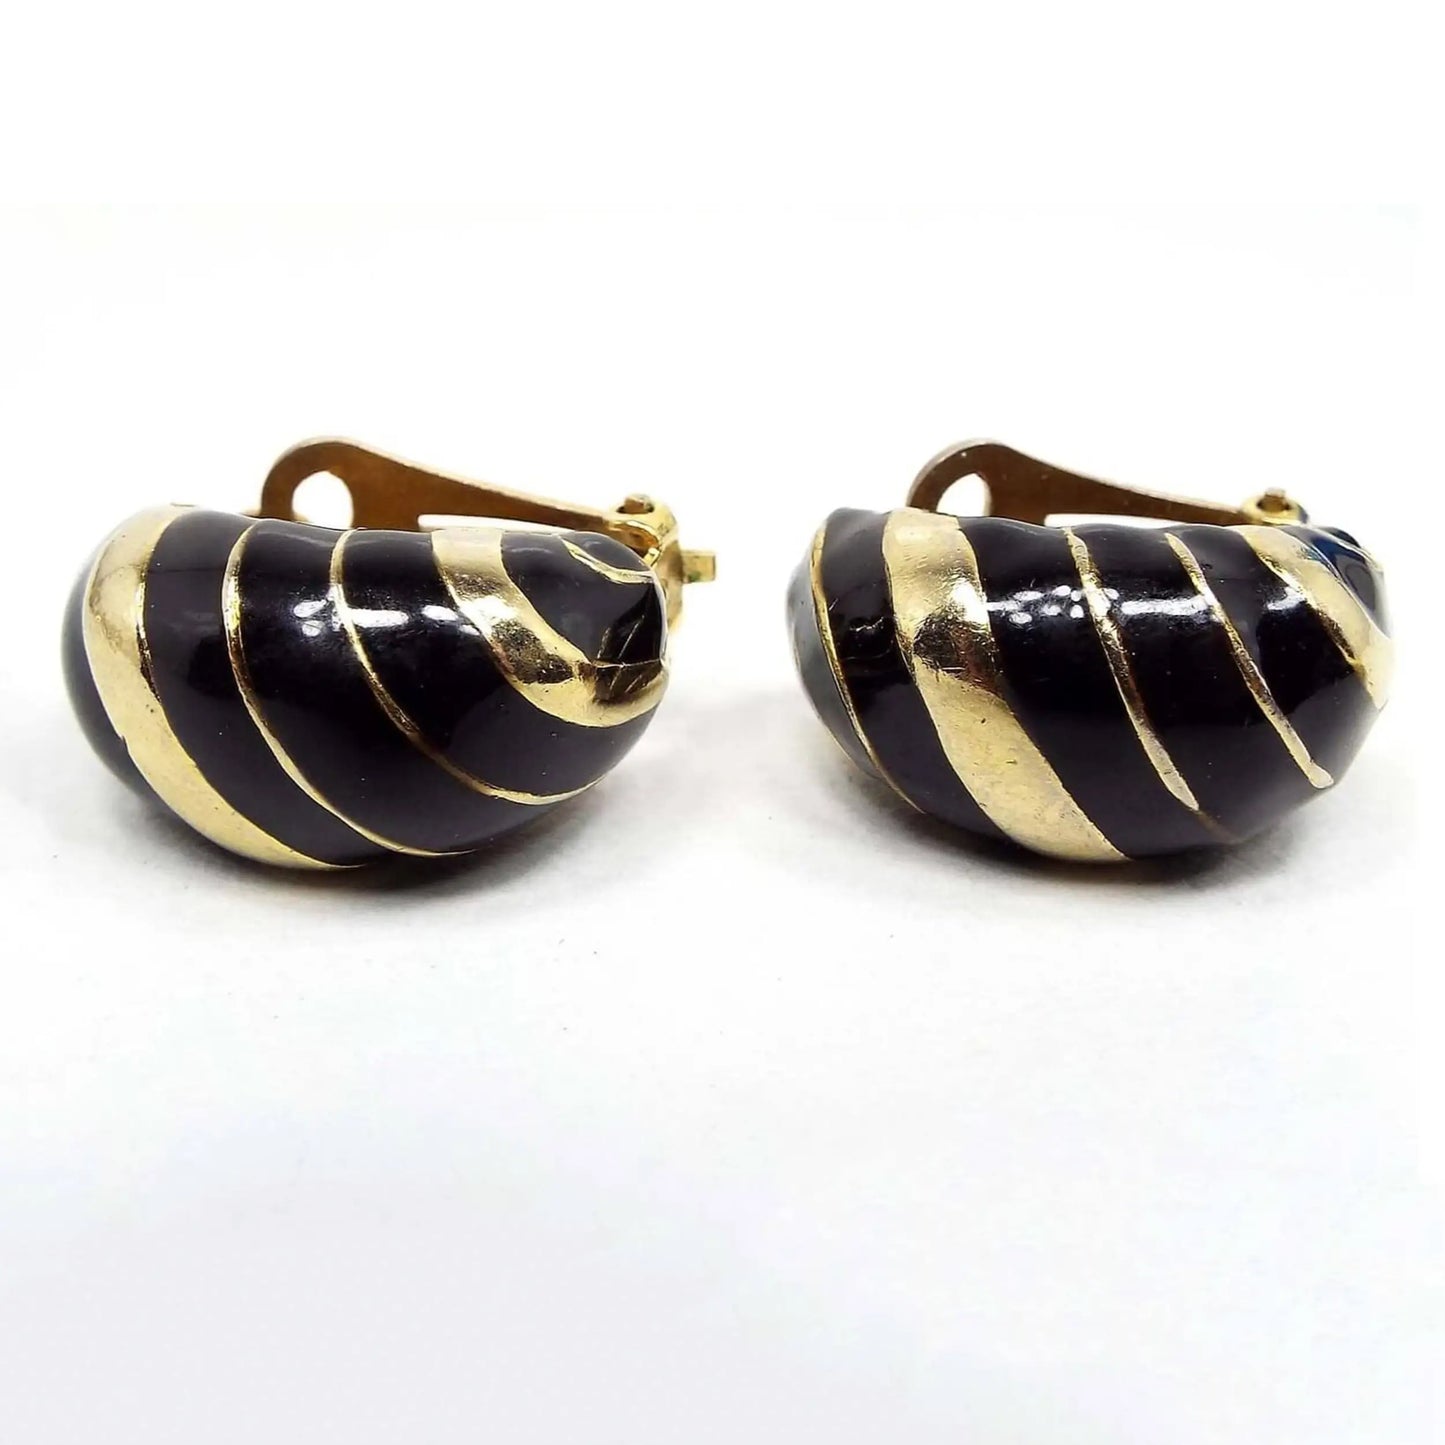 Front view of the retro vintage enameled half hoop earrings. The metal is gold tone in color. There are diagonal bands of enamel and metal.